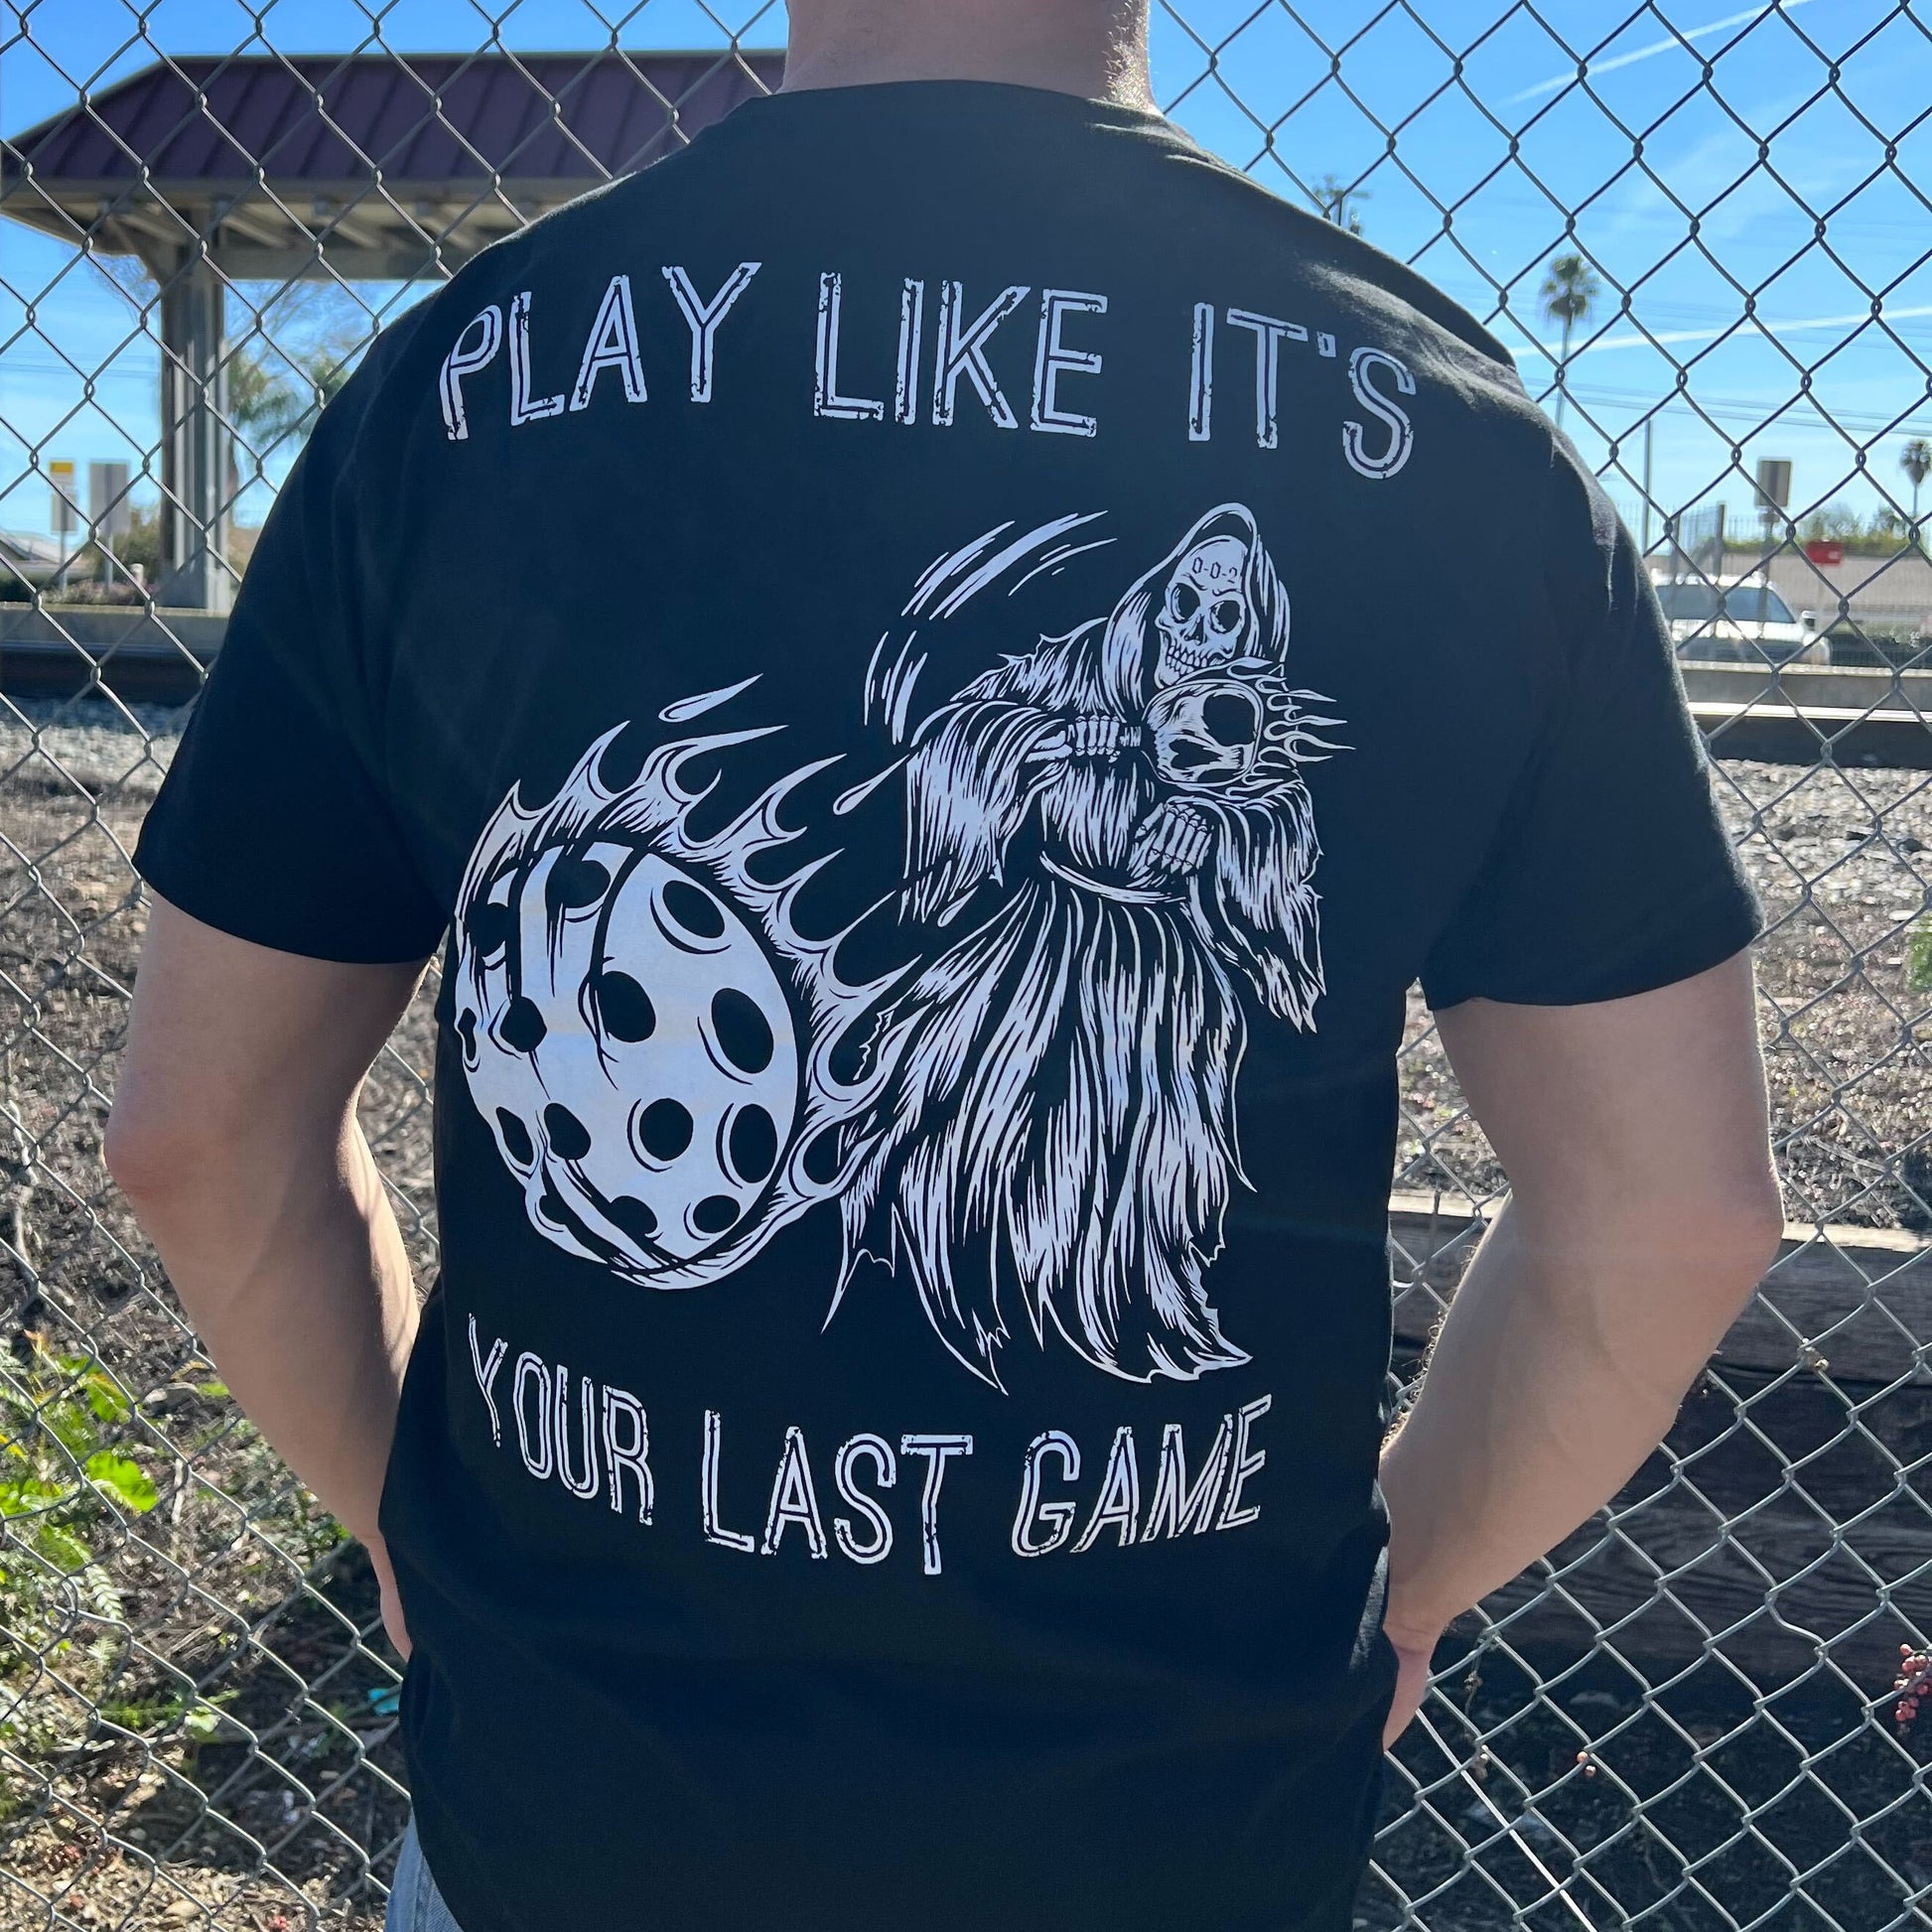 Pickleball Shirt - Play like It's Your Last Game - Back Angle in front of a fence